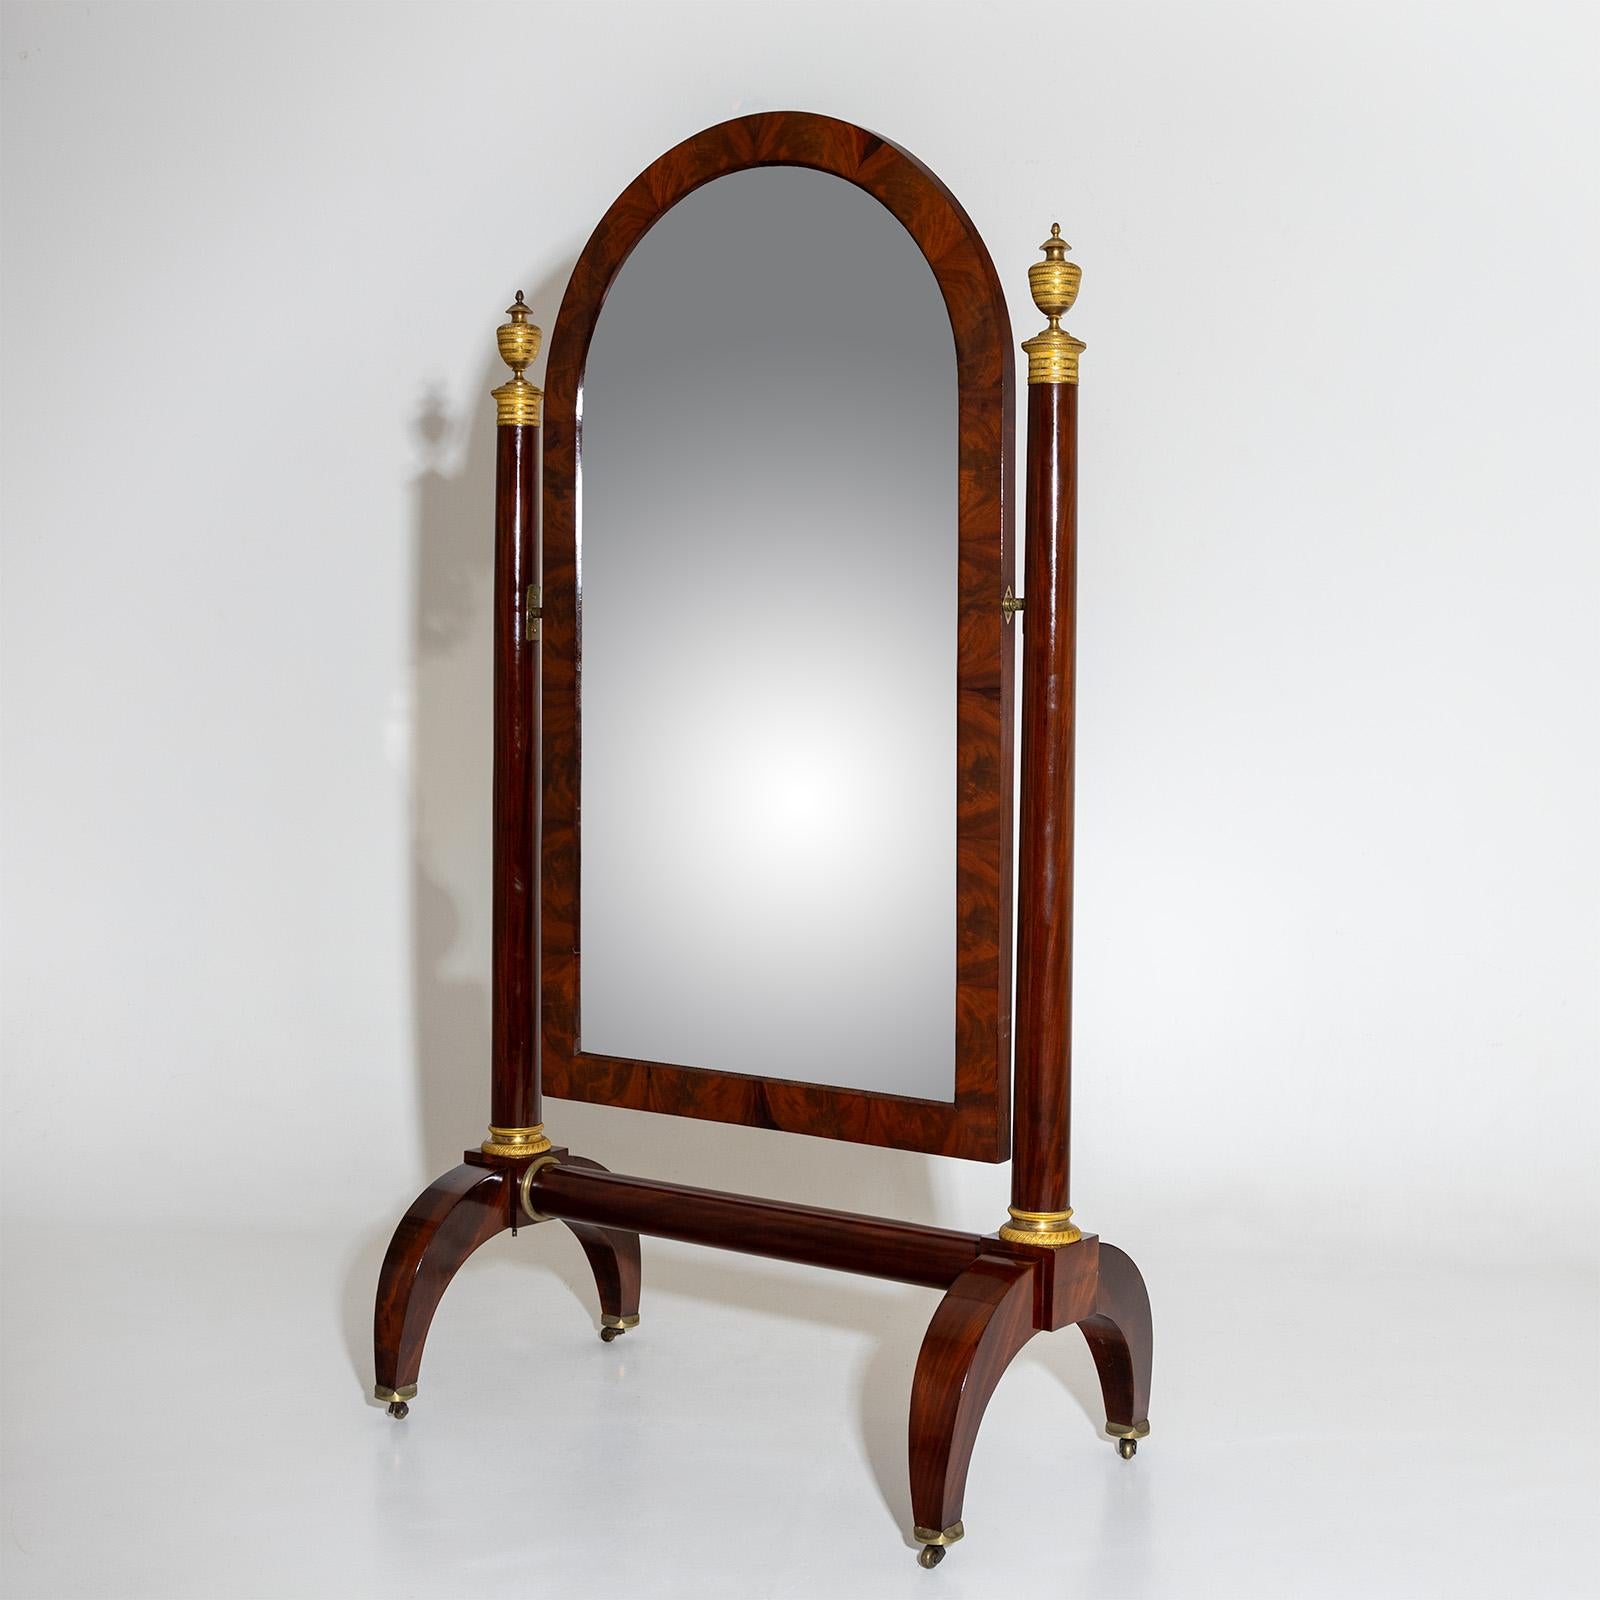 Large standing mirror with rotating mirror in an arched frame. The mirror is held by lateral columns which end in fire-gilded bronze urns. The bases are also fire-gilt. The psyche stands on forked legs with brass castors. The mirror is veneered in